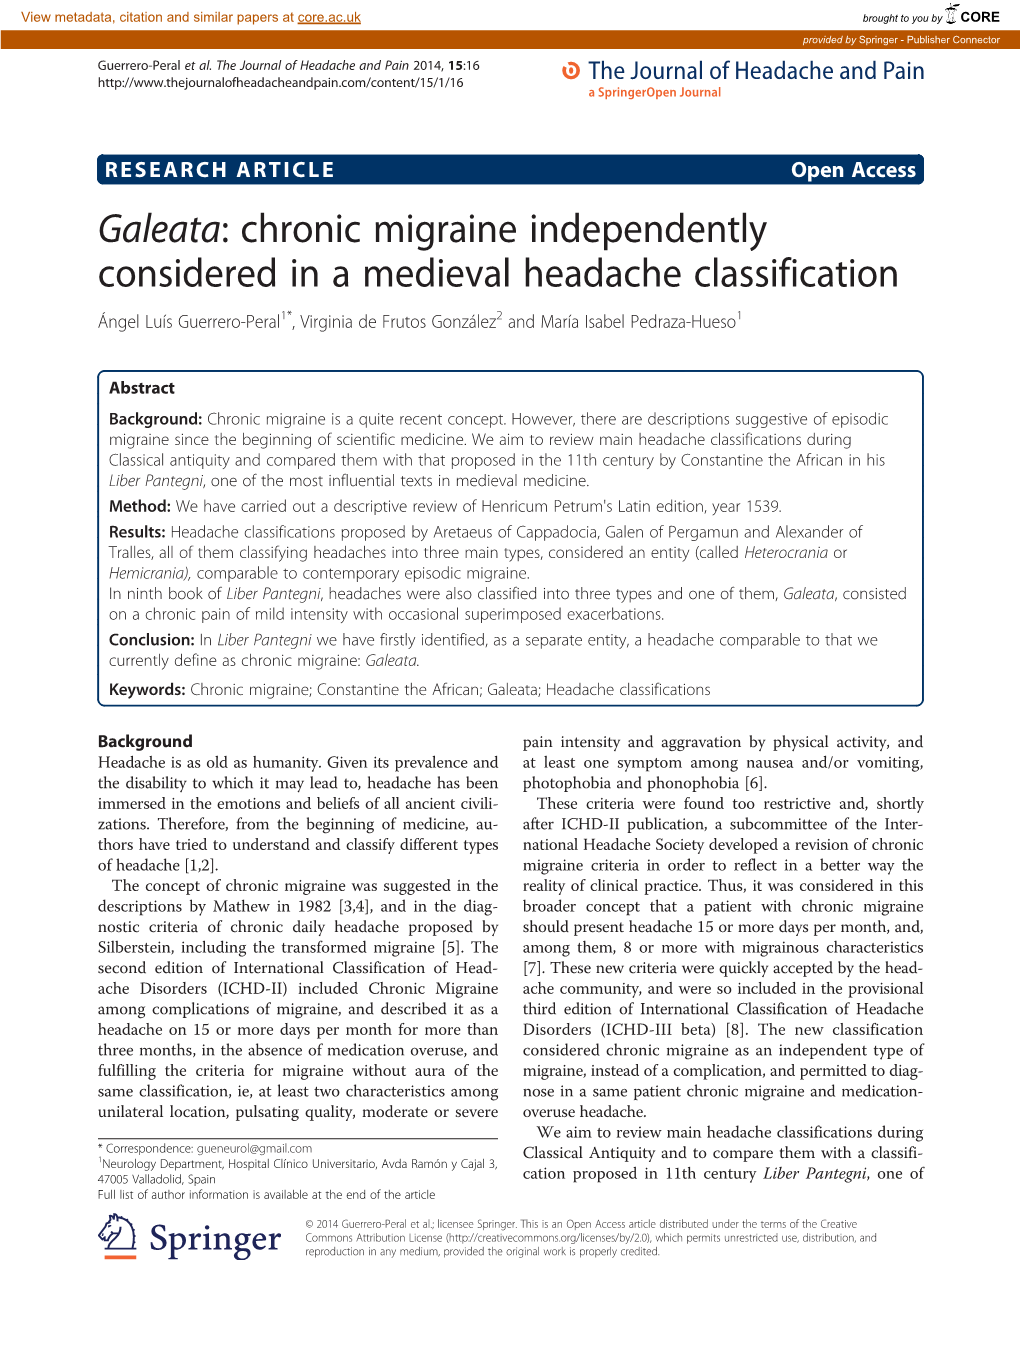 Chronic Migraine Independently Considered in a Medieval Headache Classification